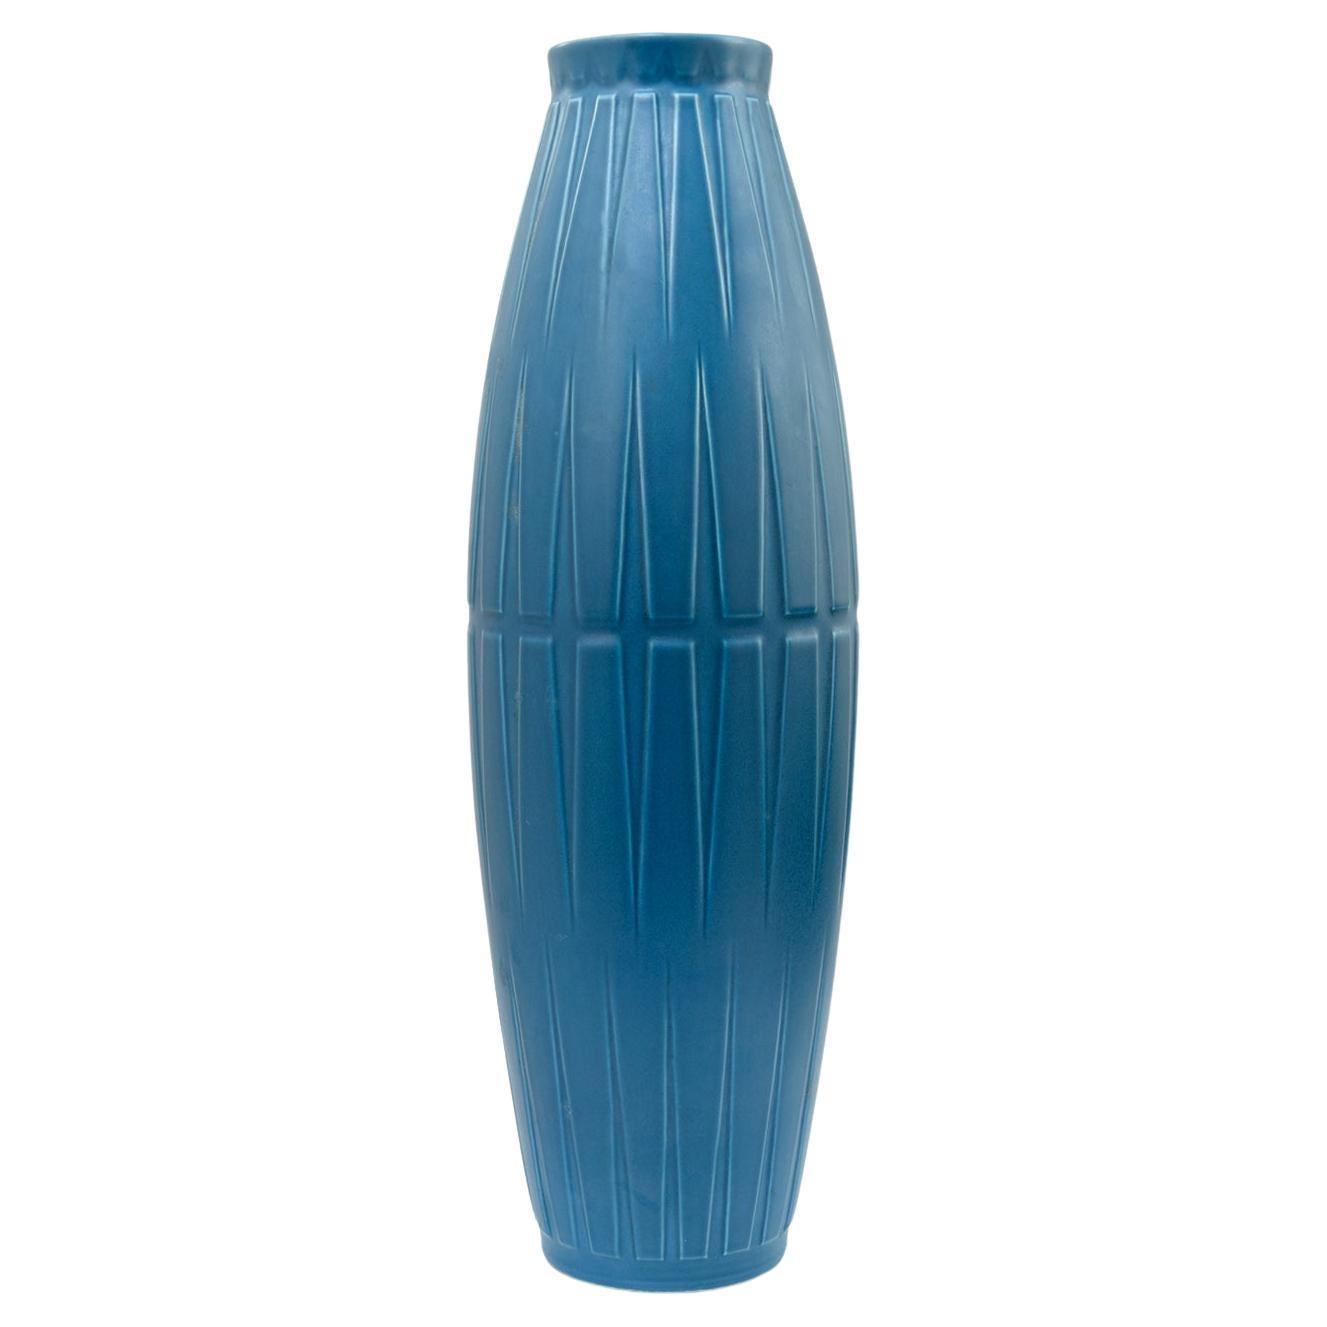 Bo Fajans tall blue ceramic vase with geometric pattern in relief, Sweden, 1940 For Sale